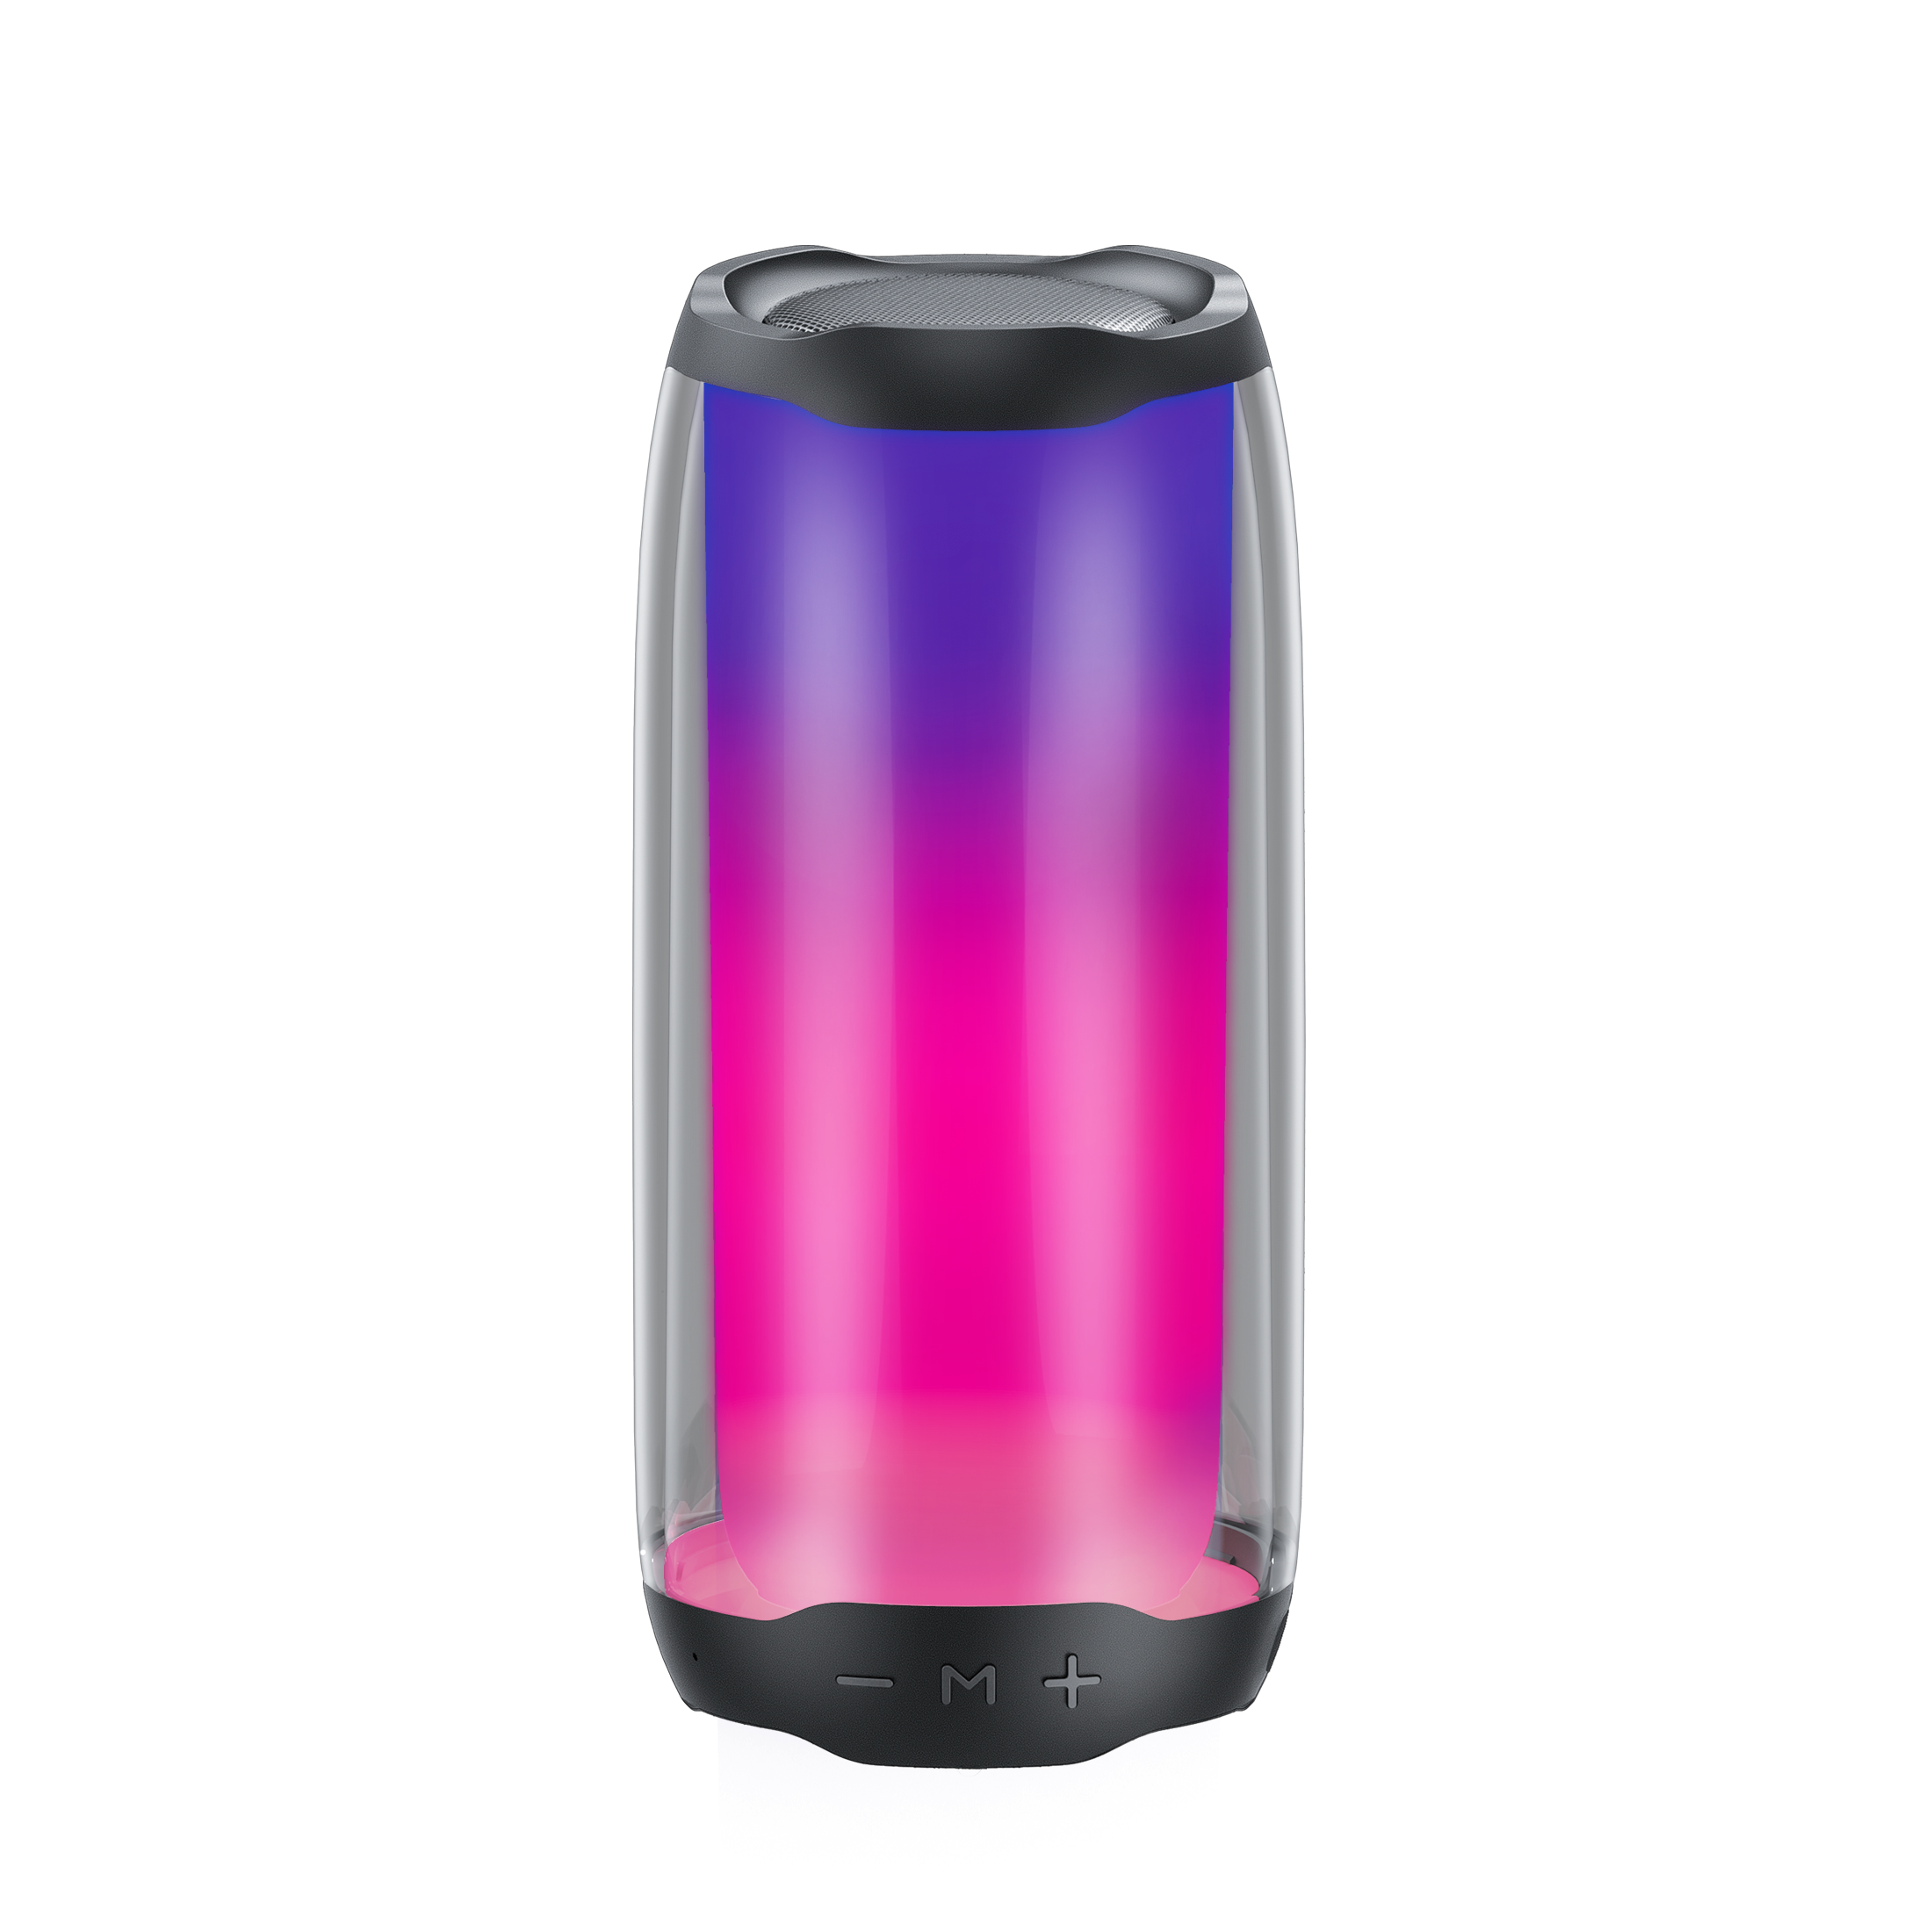 WEKOME D31 Bluetooth Speaker with flame LED lights